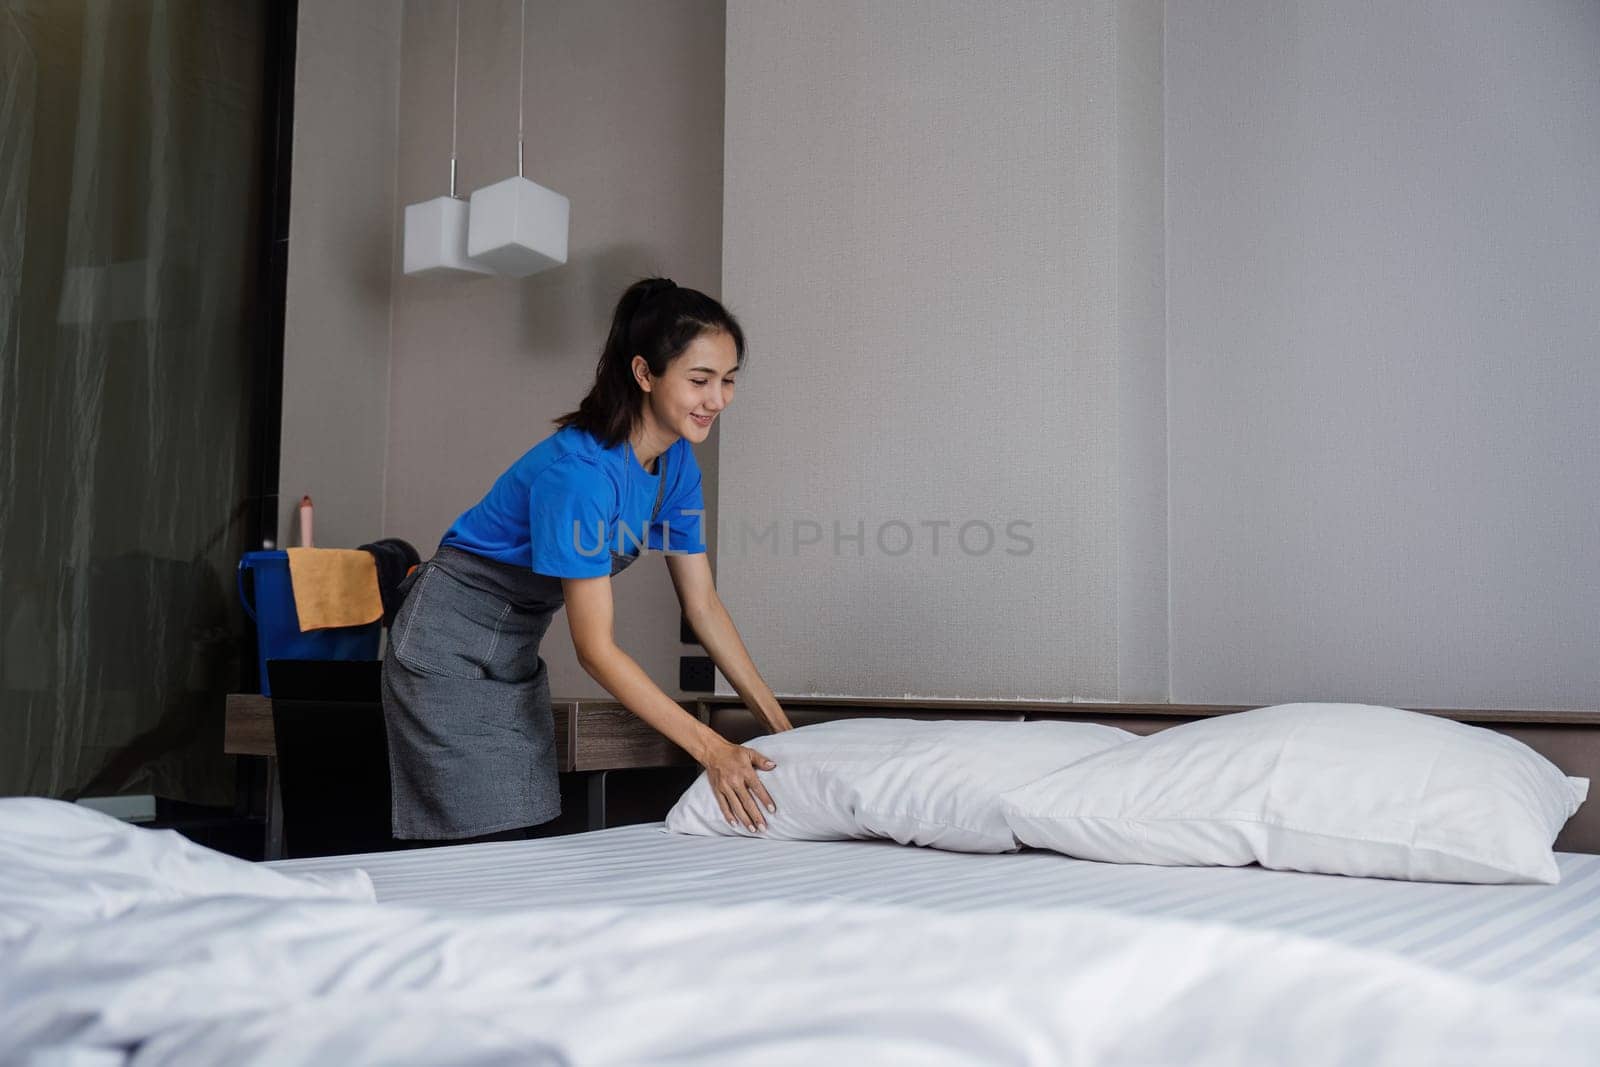 cleaning service woman worker clean bedroom at home. housekeeper cleaner feel happy and make bed look neat. housework and housekeeping cleaning service by itchaznong